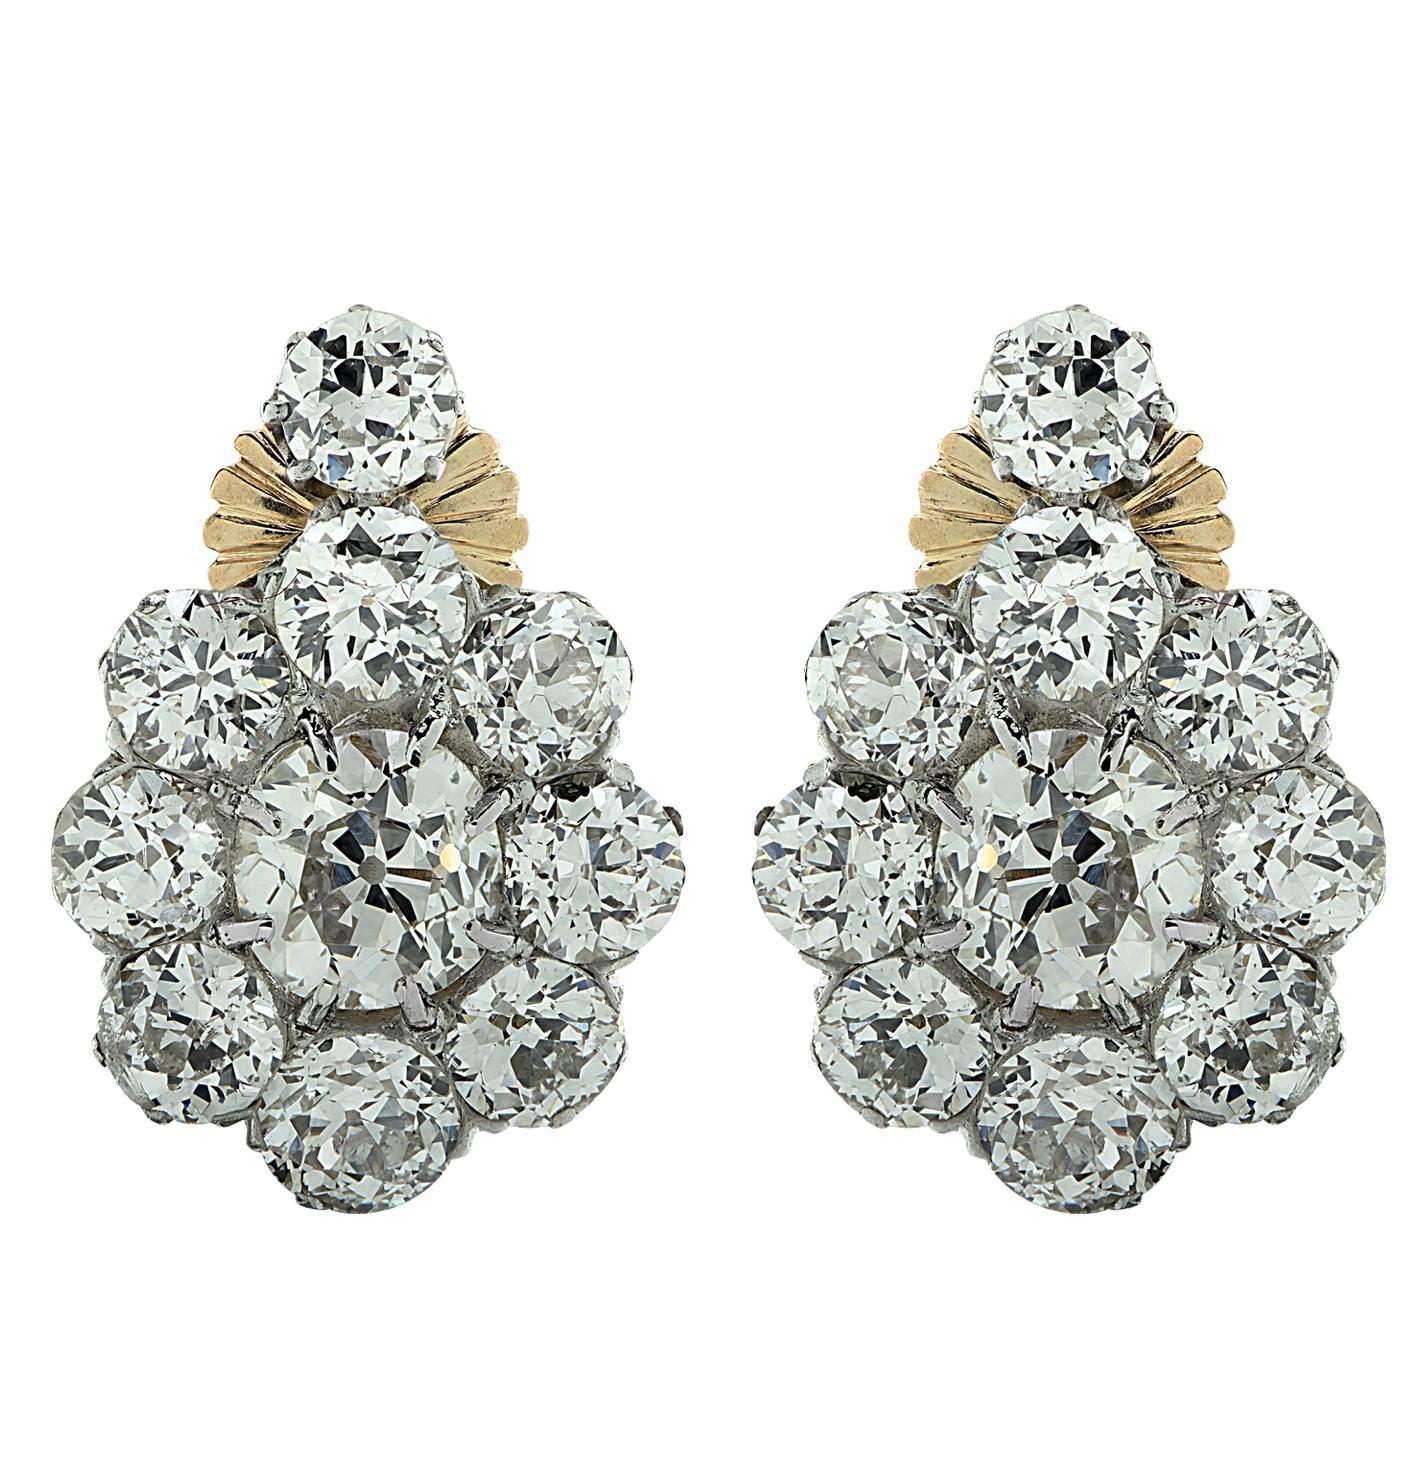 Beautiful Victorian Earrings crafted in 18 karat yellow gold and silver featuring 18 Old Mine Cut diamonds weighing approximately 3.80 carats total, G color, VS-SI clarity and two Old Mine Cut diamonds weighing approximately 1.42 carats total. The